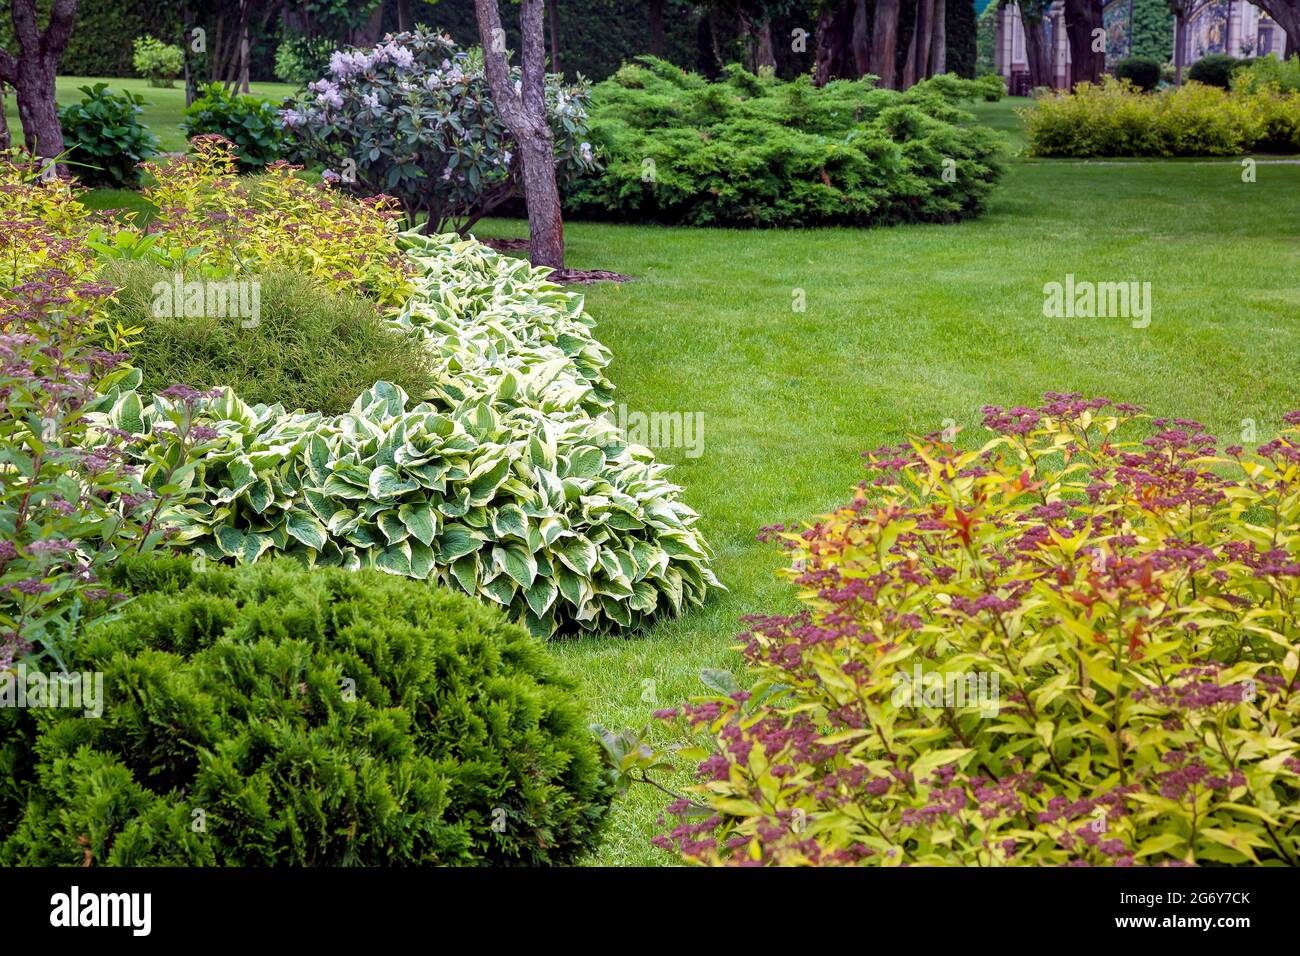 garden bed with bushes and meadow grass landscaping with plants for backyard decor in spring season in the background a park with trees, nobody. Stock Photo